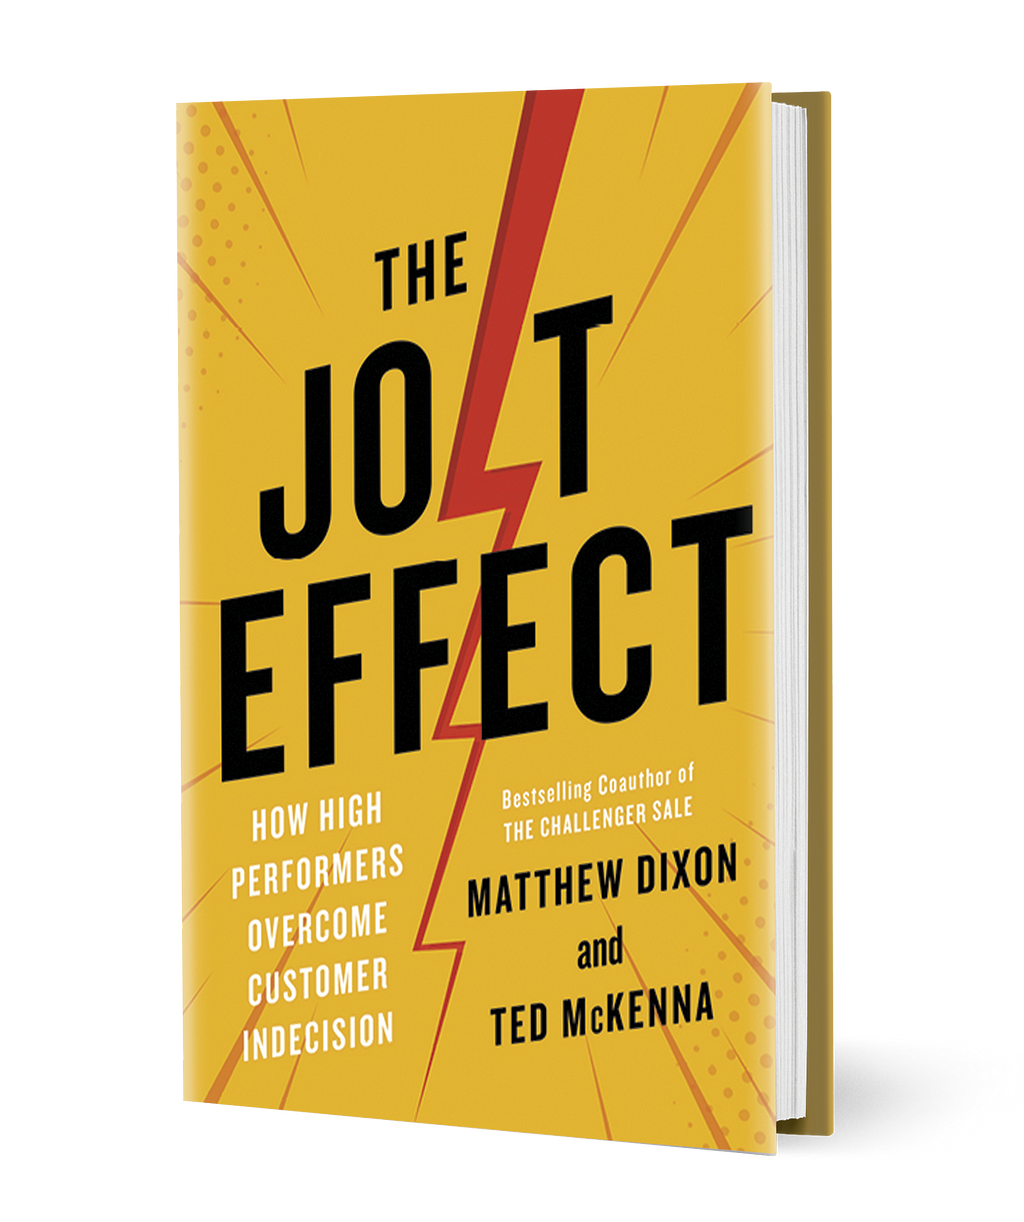 Image of the cover jacket for the book, The JOLT Effect.